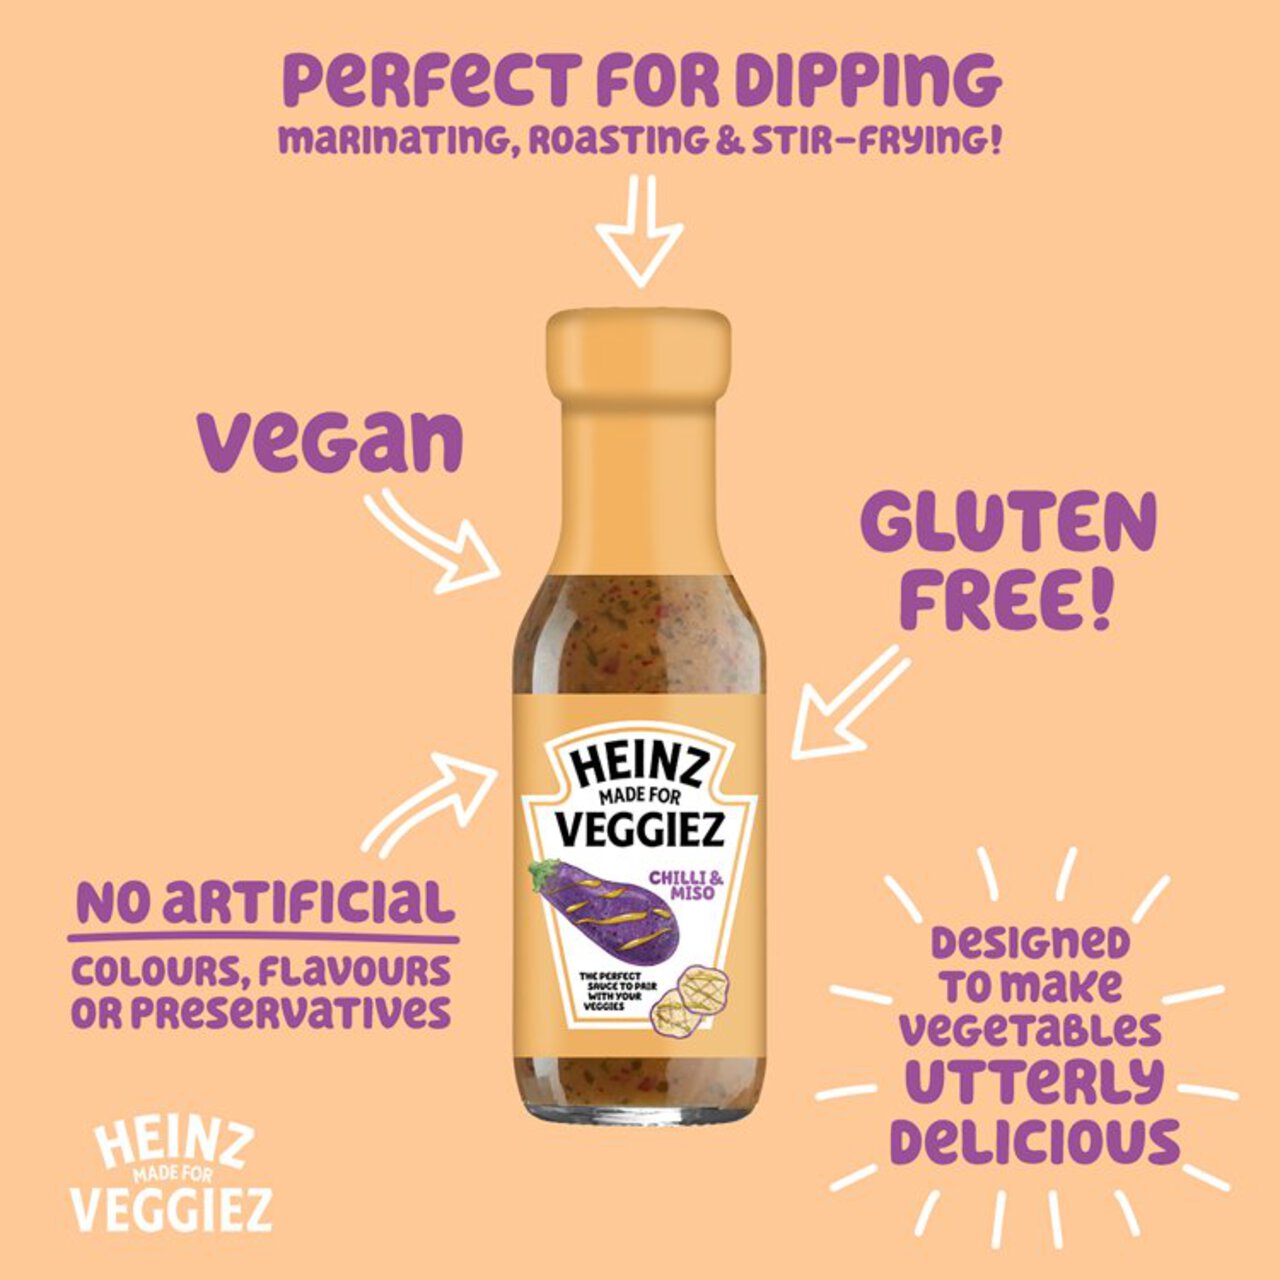 Heinz Made for Veggies - Miso & Chilli Dipping Sauce 250ml